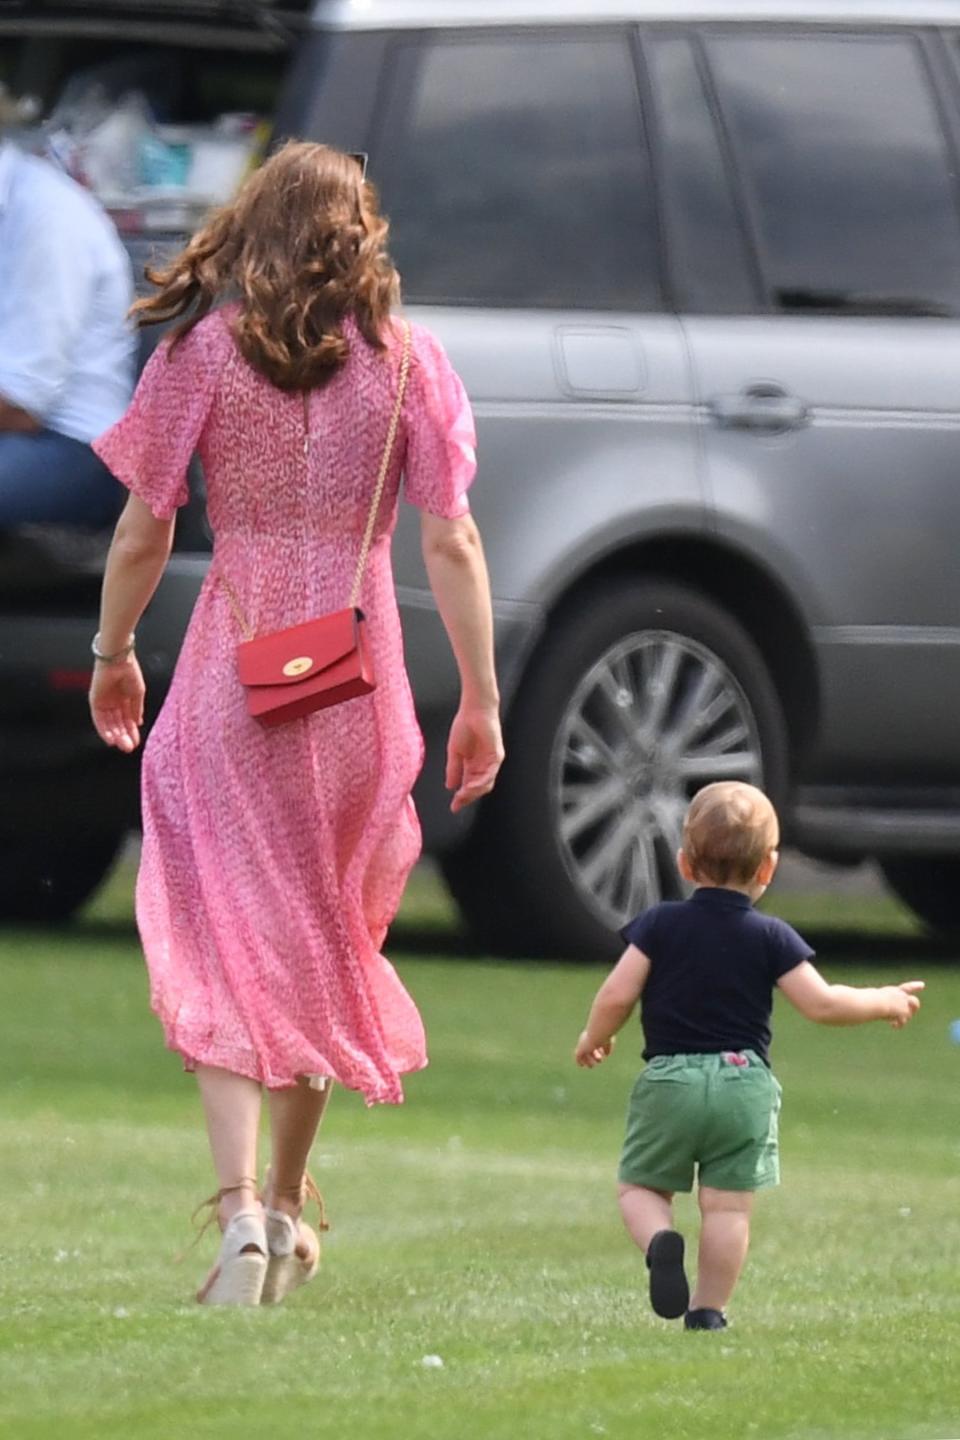 Kate and her 1-year-old son explored the field...